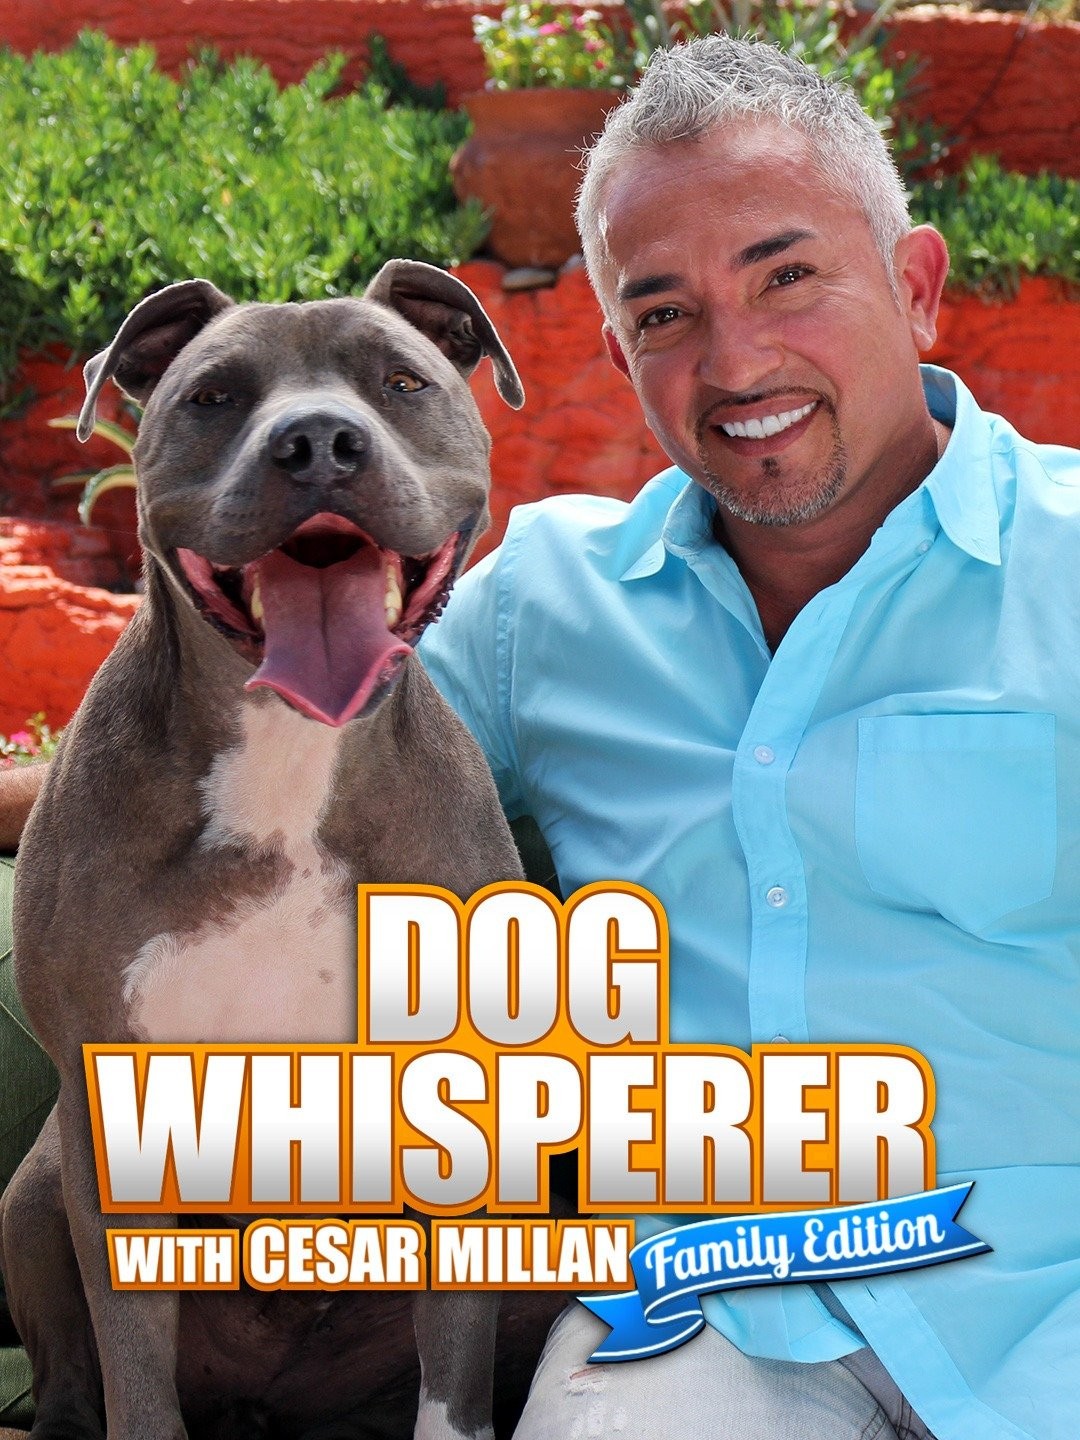 SCNG PREMIUM MAGAZINE July 2022 ANIMAL TALES Cesar Millan YOUR GUIDE TO PETS  Dog